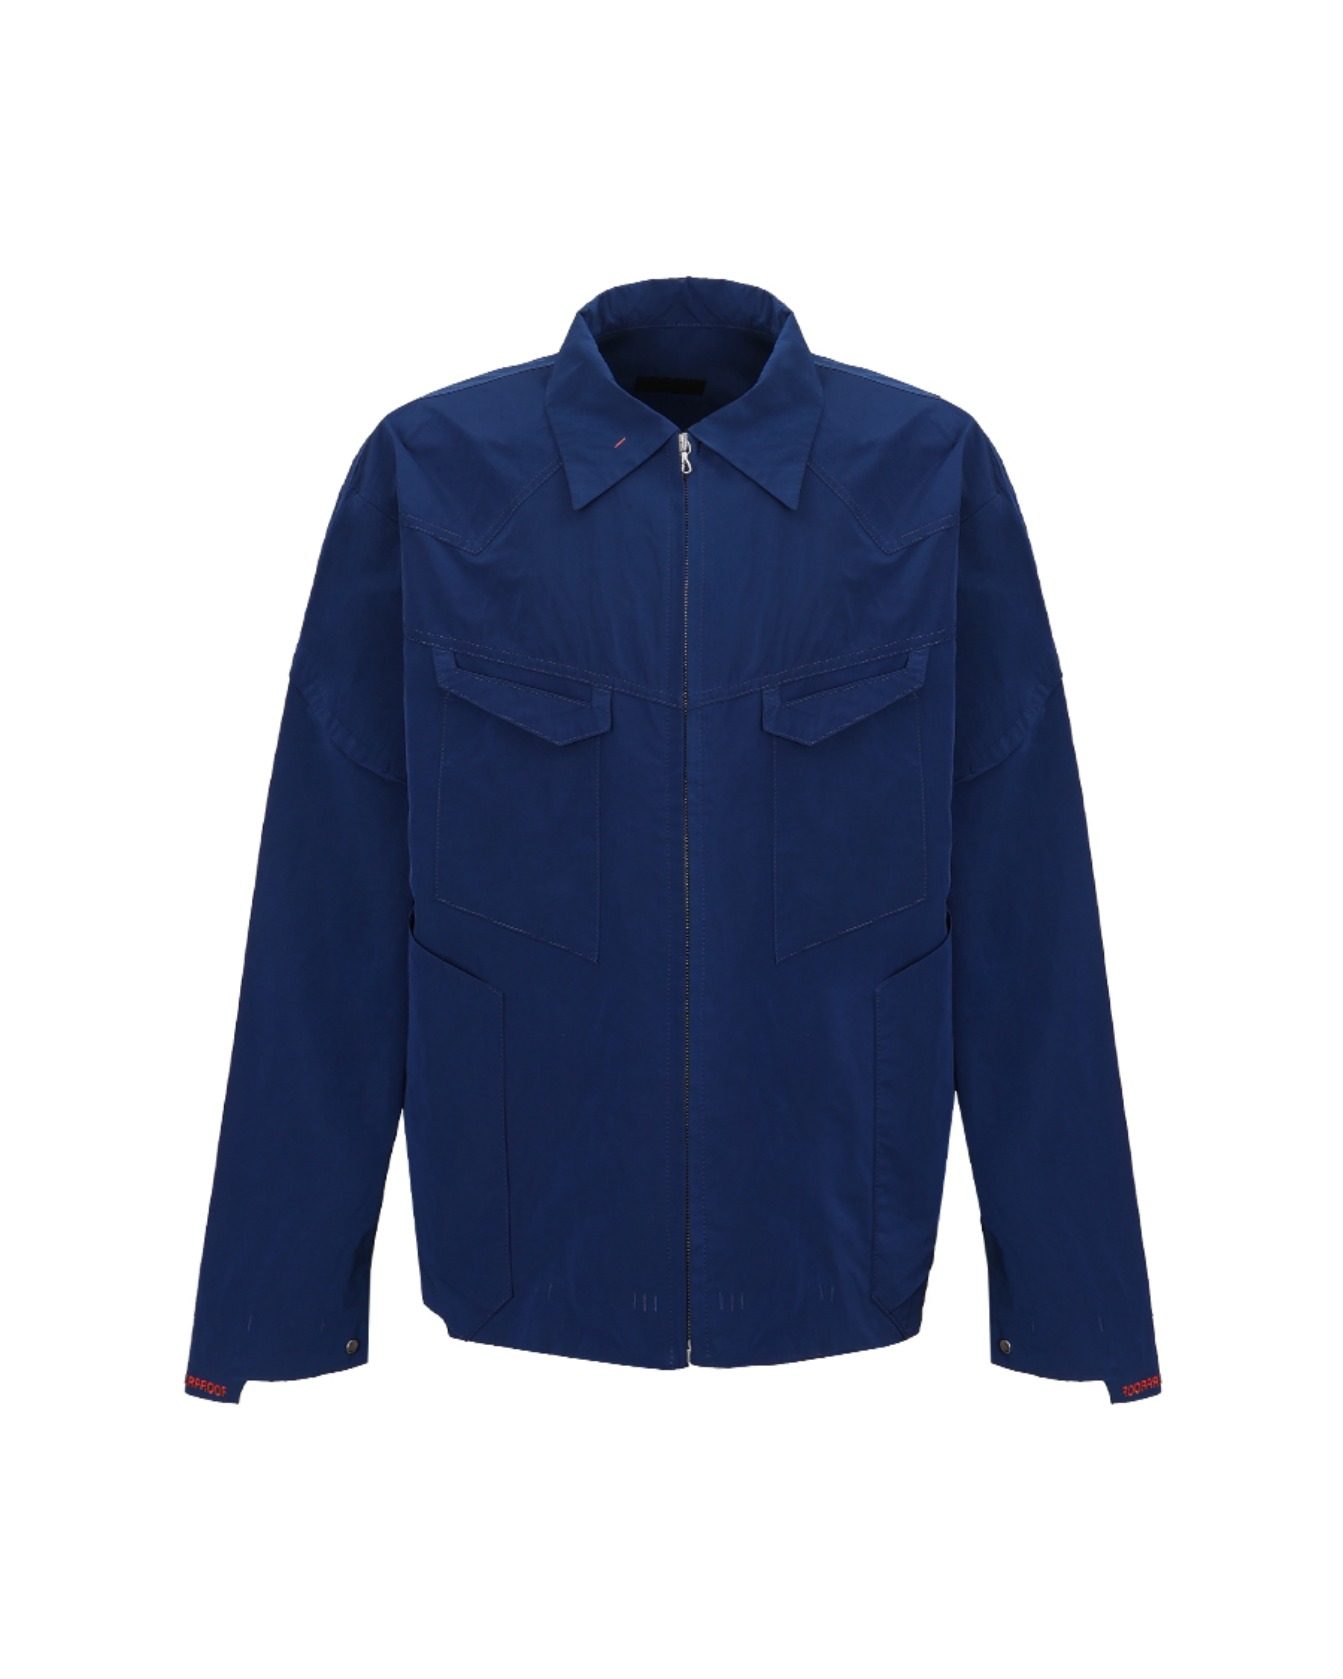 (A)   NON FUNCTIONAL JACKET   (BLUE) (LIMITED EDITION)